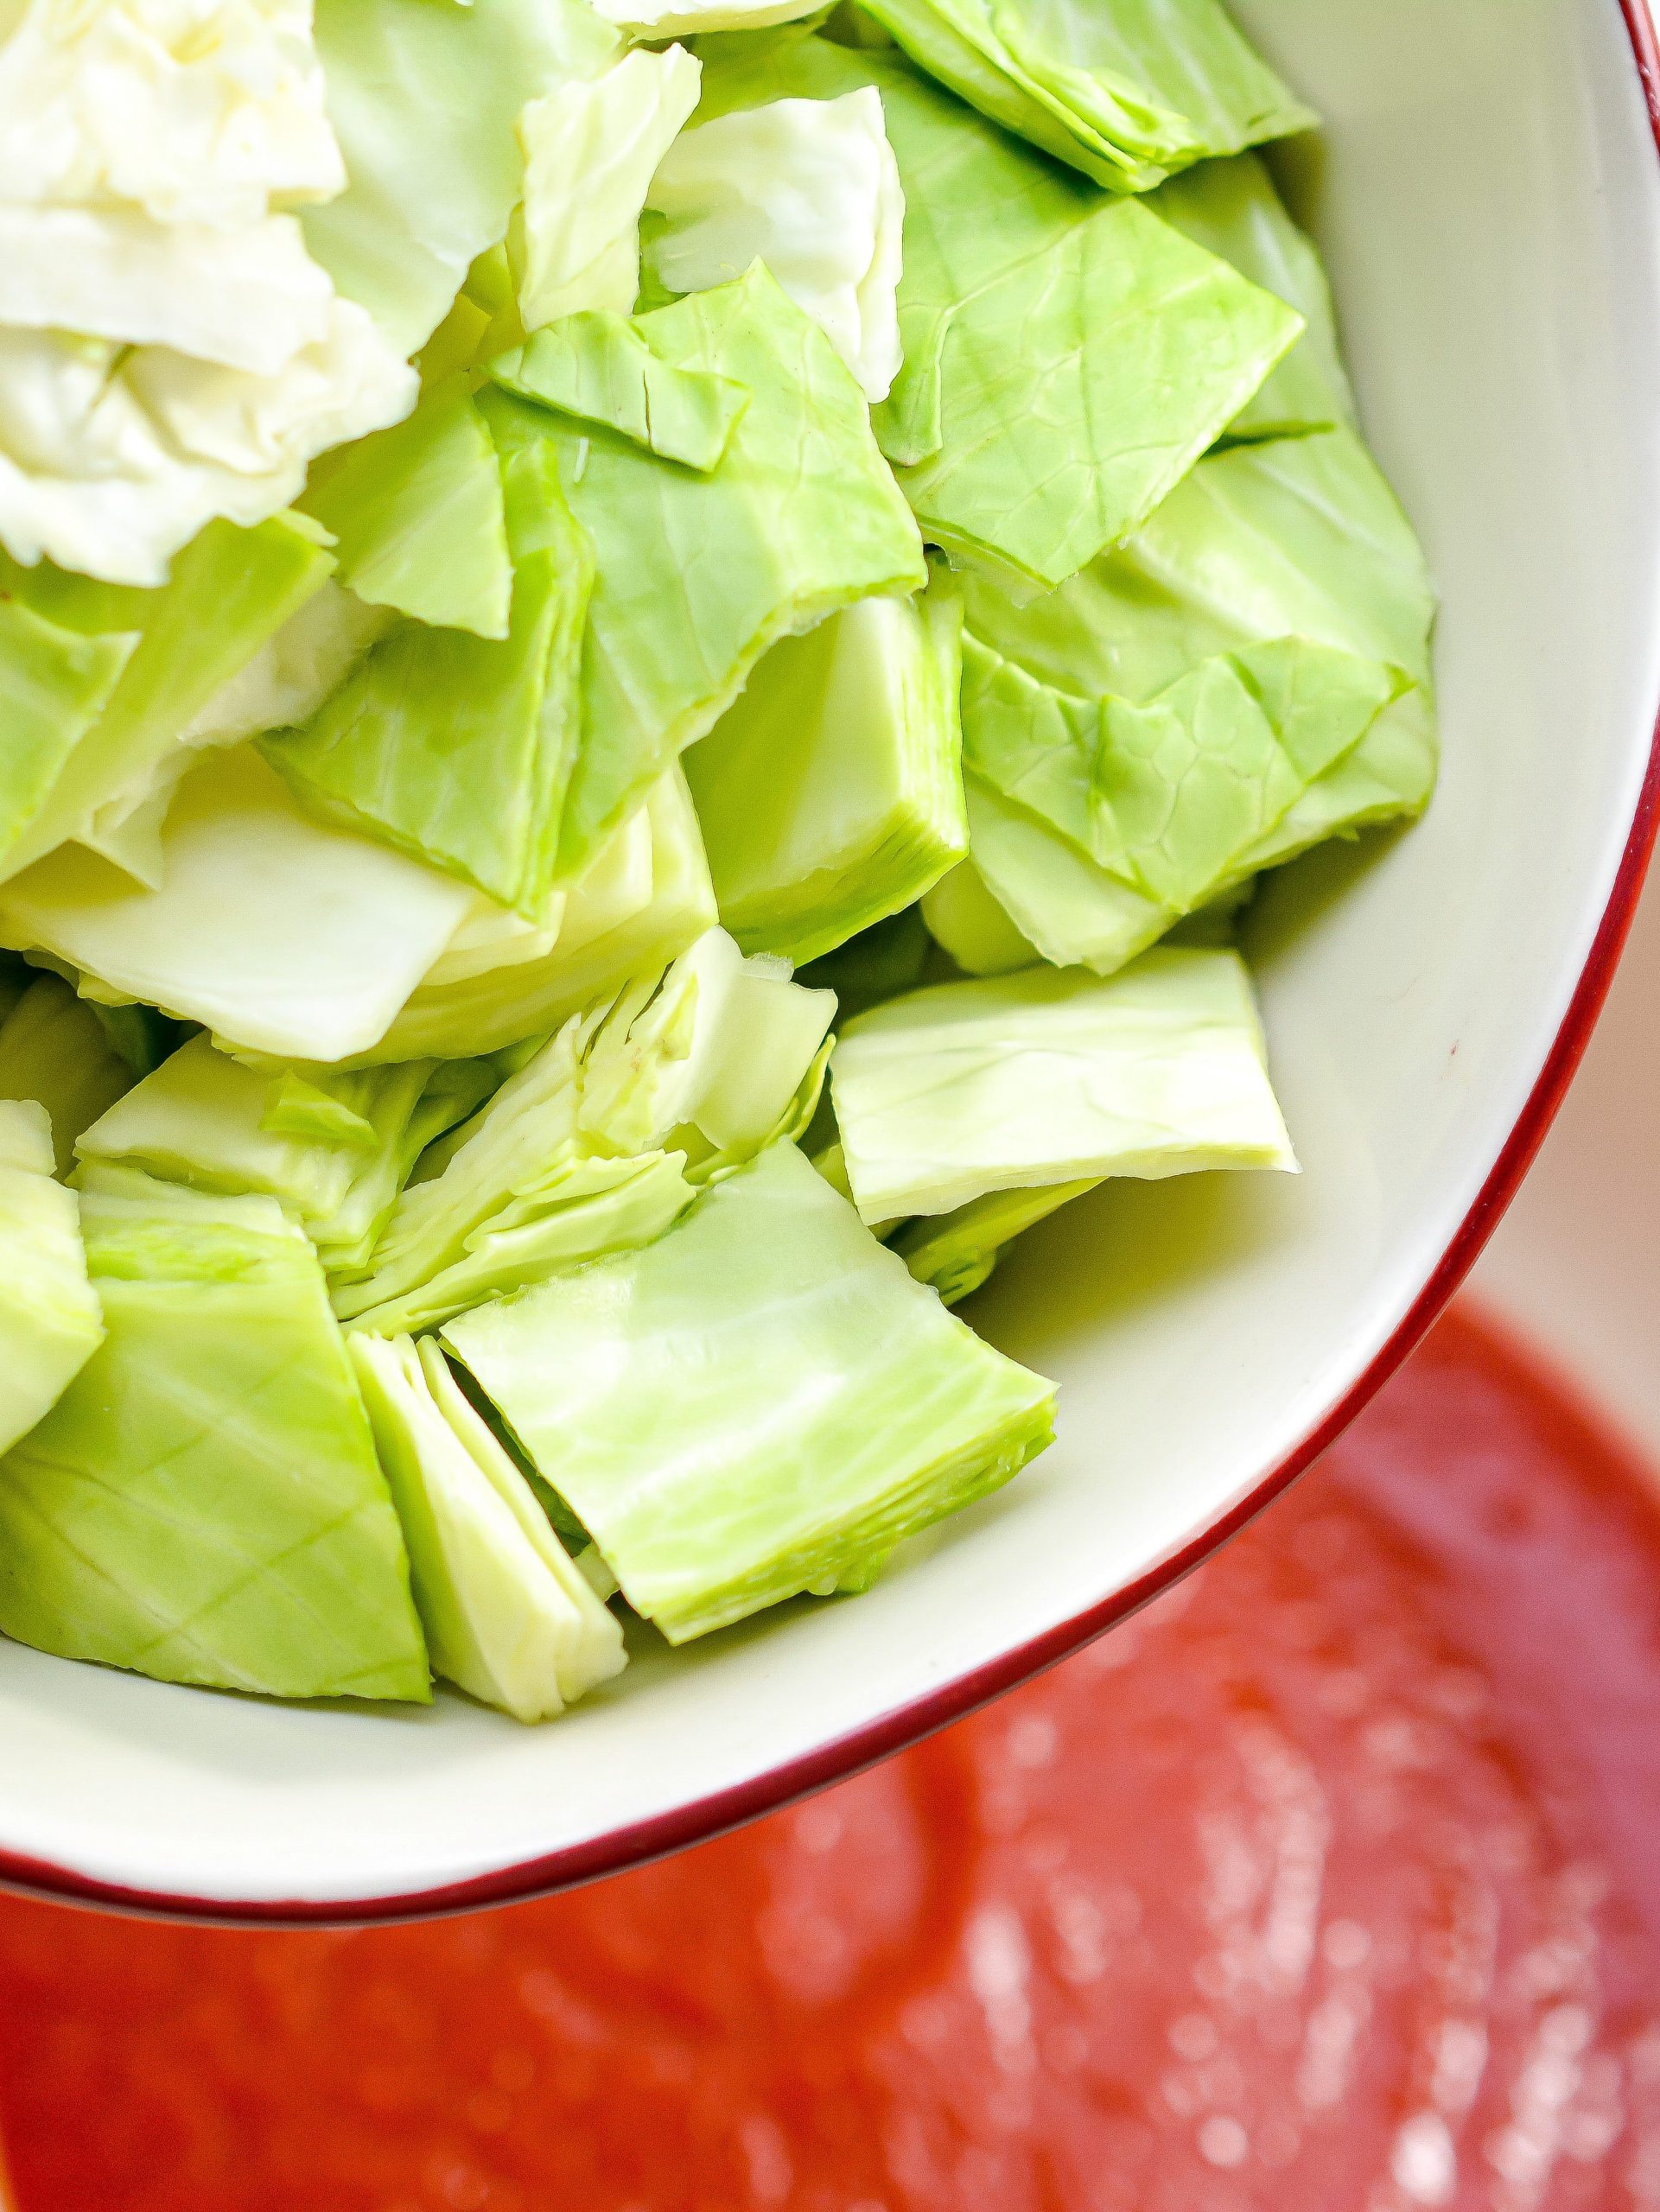 In a large mixing bowl, mix together the cabbage and tomato sauce.